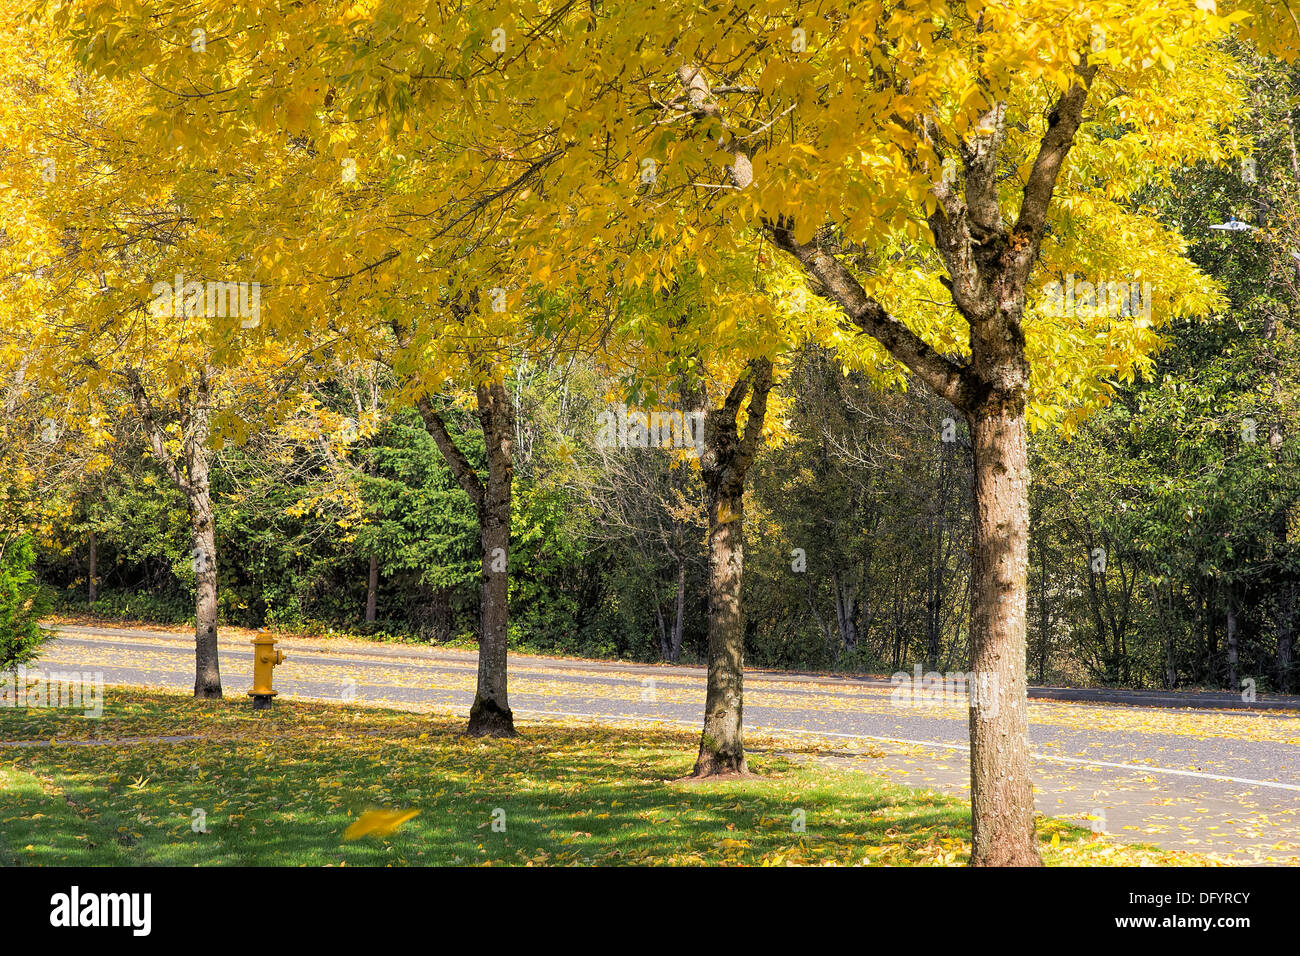 Yellow Falling Leaves from Residential Neighborhood Beech Trees Along the Road in Autumn Stock Photo